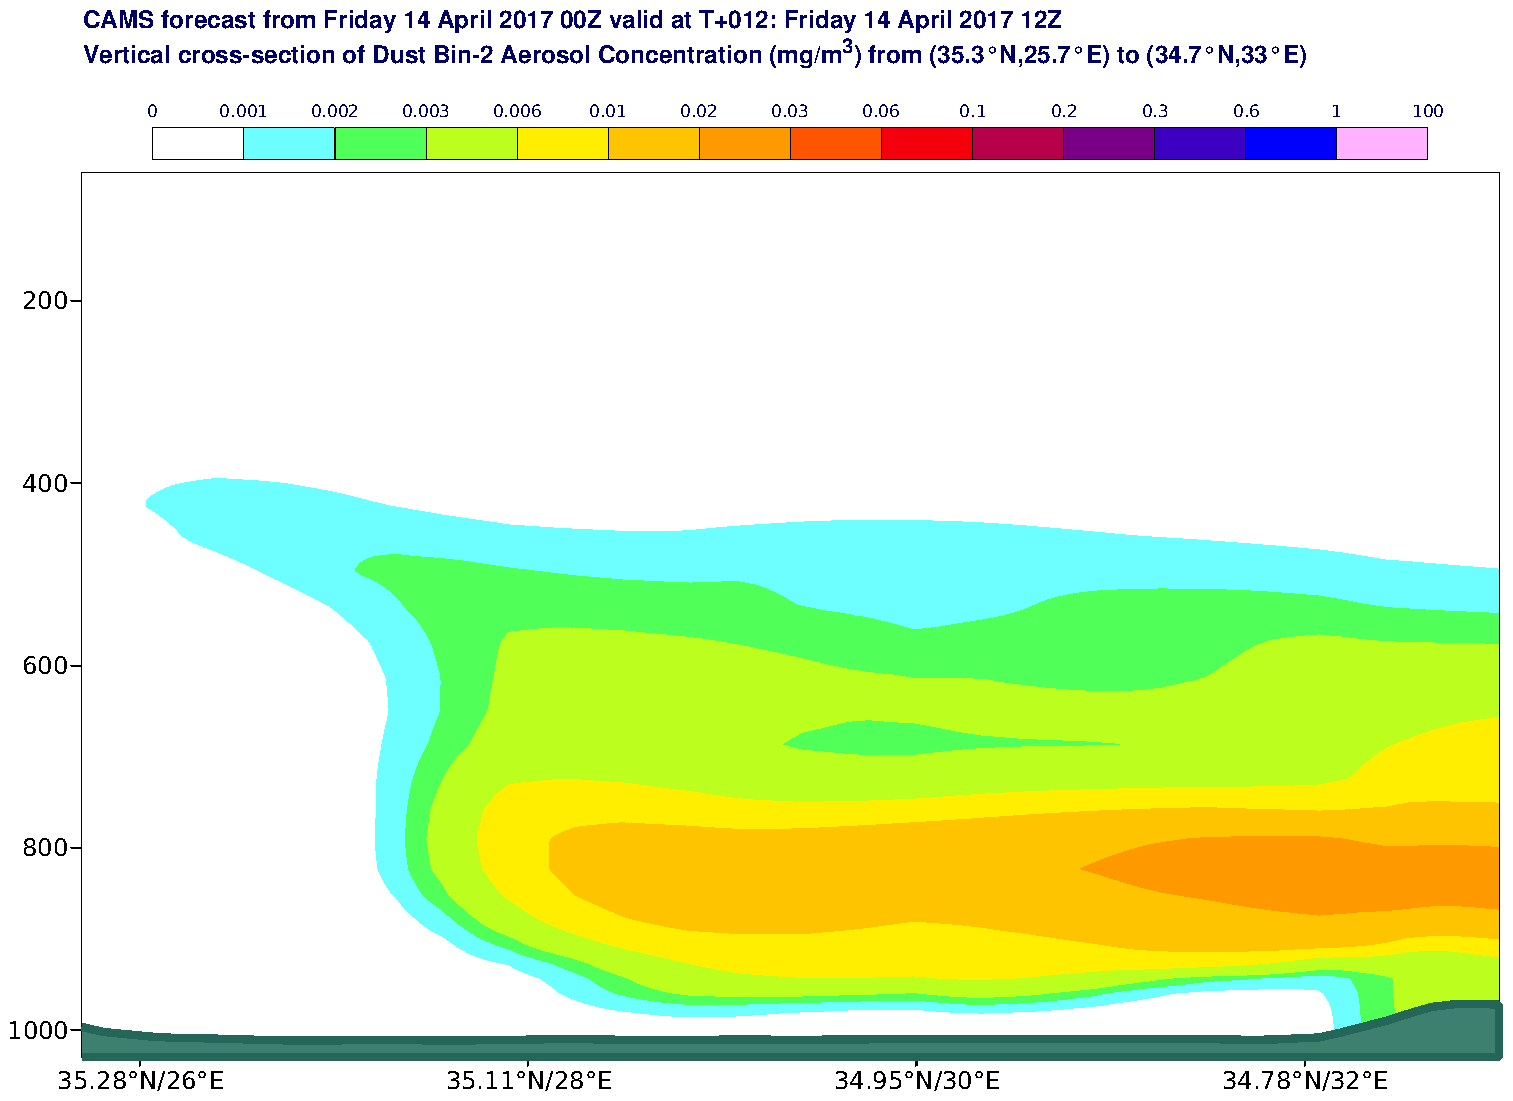 Vertical cross-section of Dust Bin-2 Aerosol Concentration (mg/m3) valid at T12 - 2017-04-14 12:00